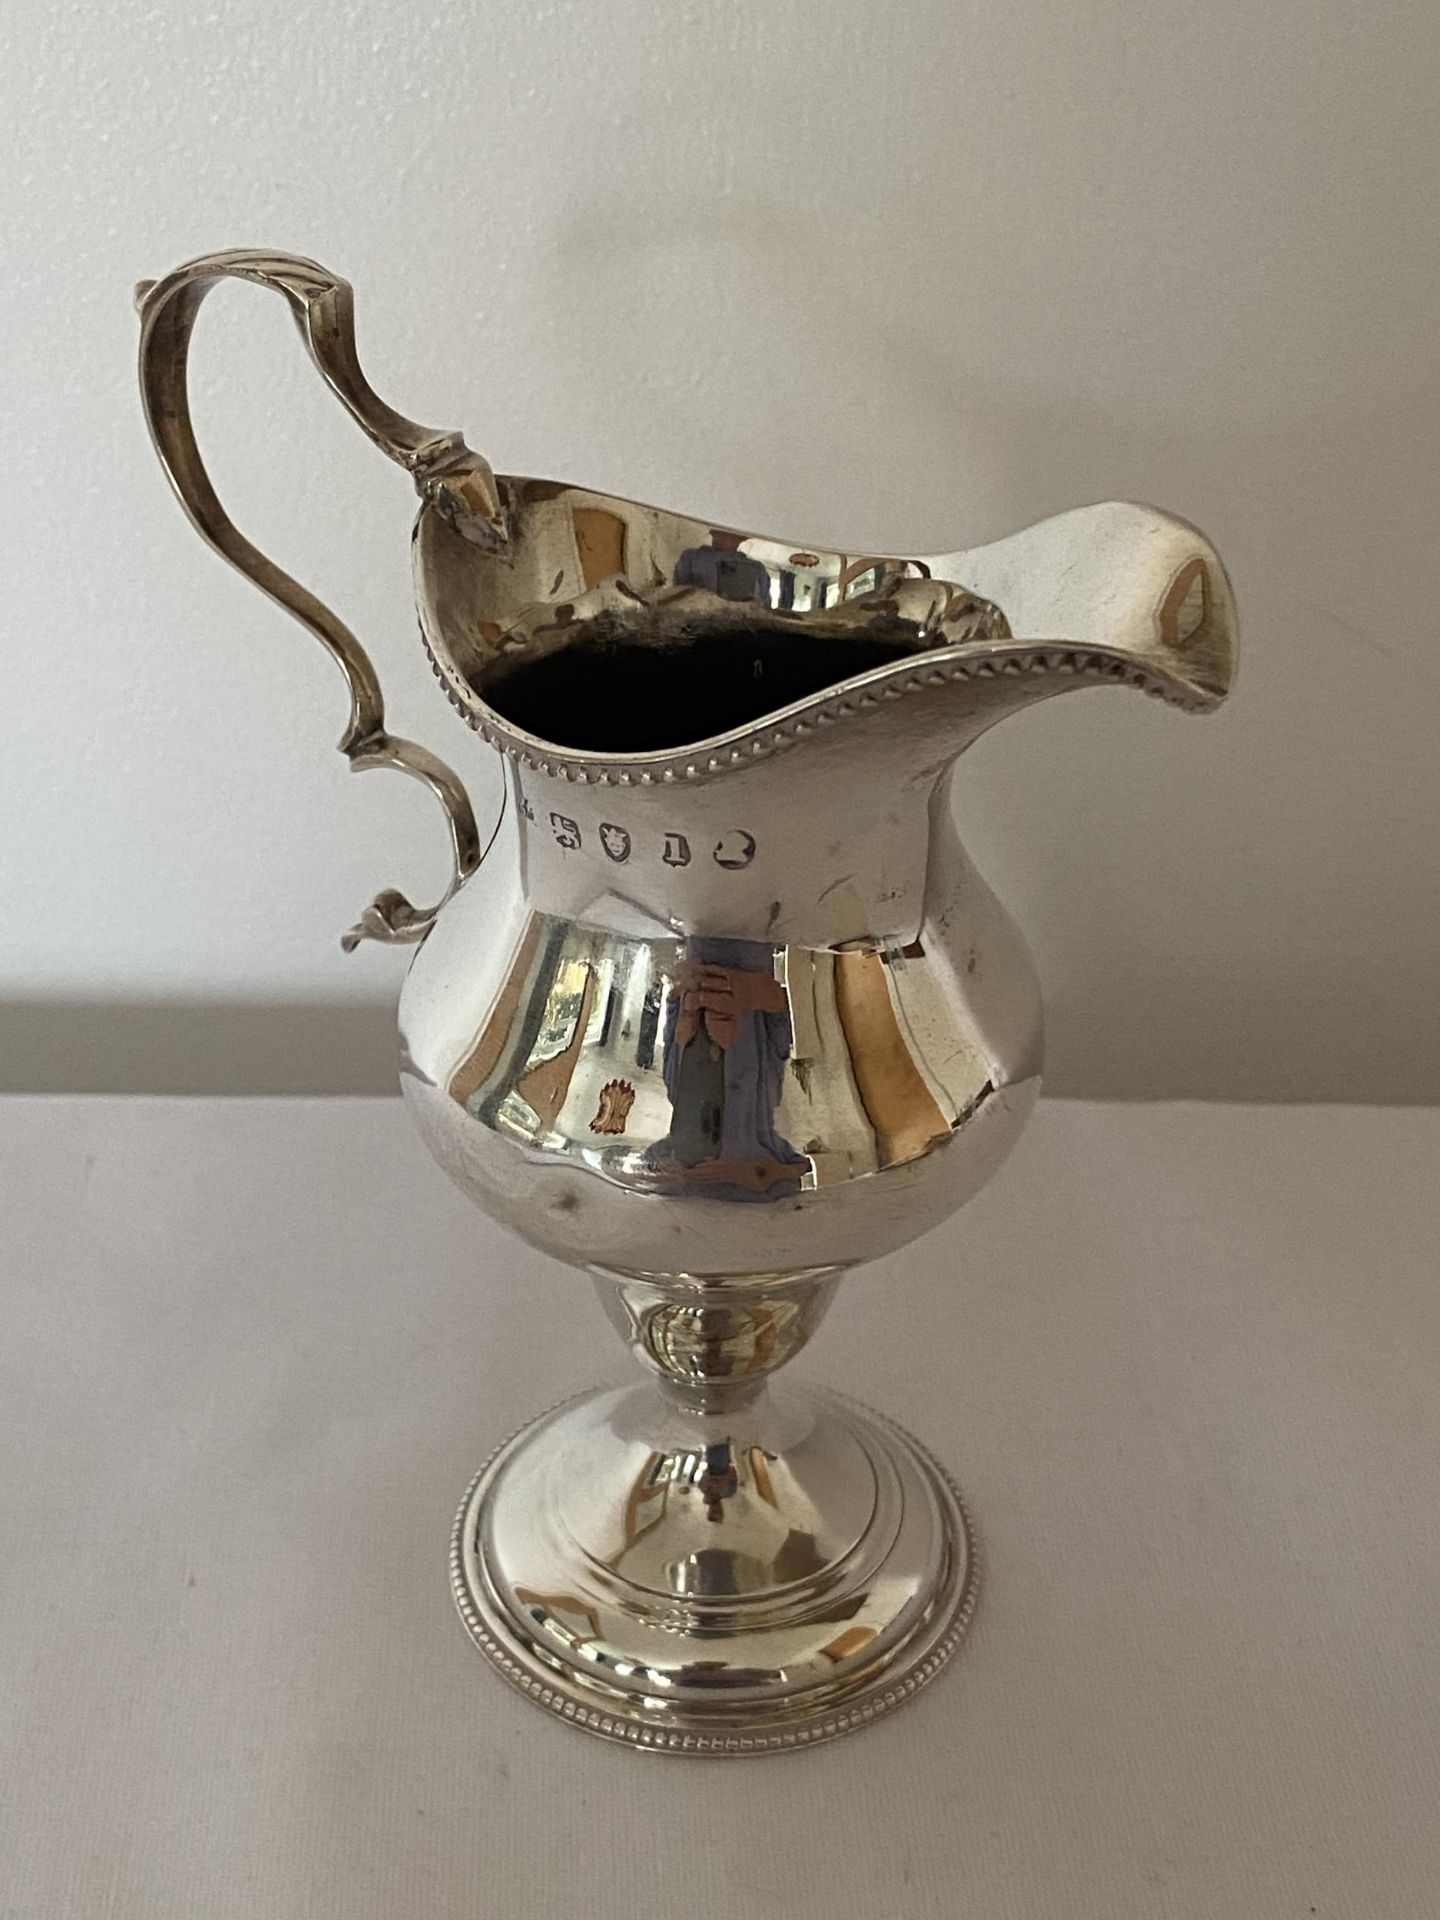 A GEORGE III 1786 HALLMARKED LONDON SILVER CREAM JUG, MAKER POSSIBLY G.W, 13CM TALL, GROSS WEIGHT 92 - Image 5 of 15